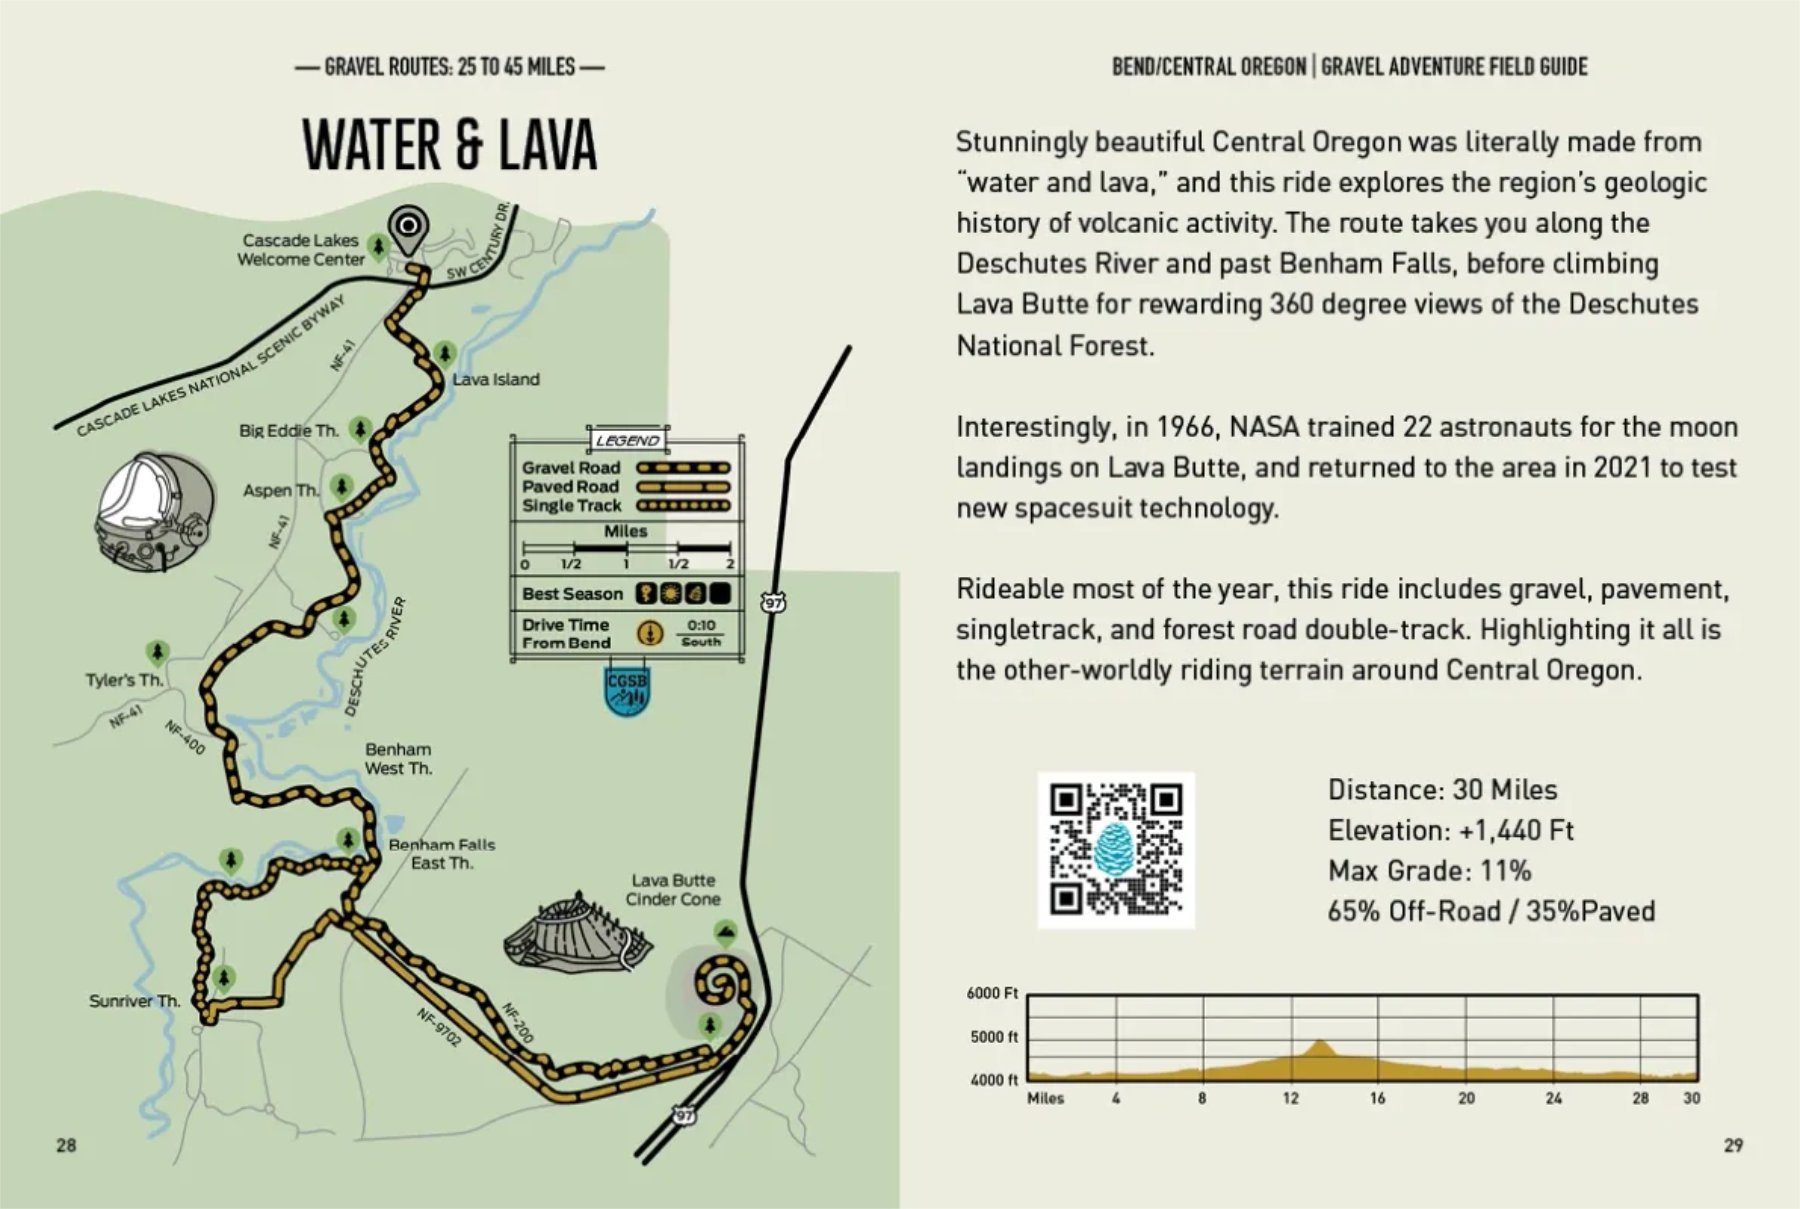 gravel adventure field guide bend_water and lava gravel route.jpg